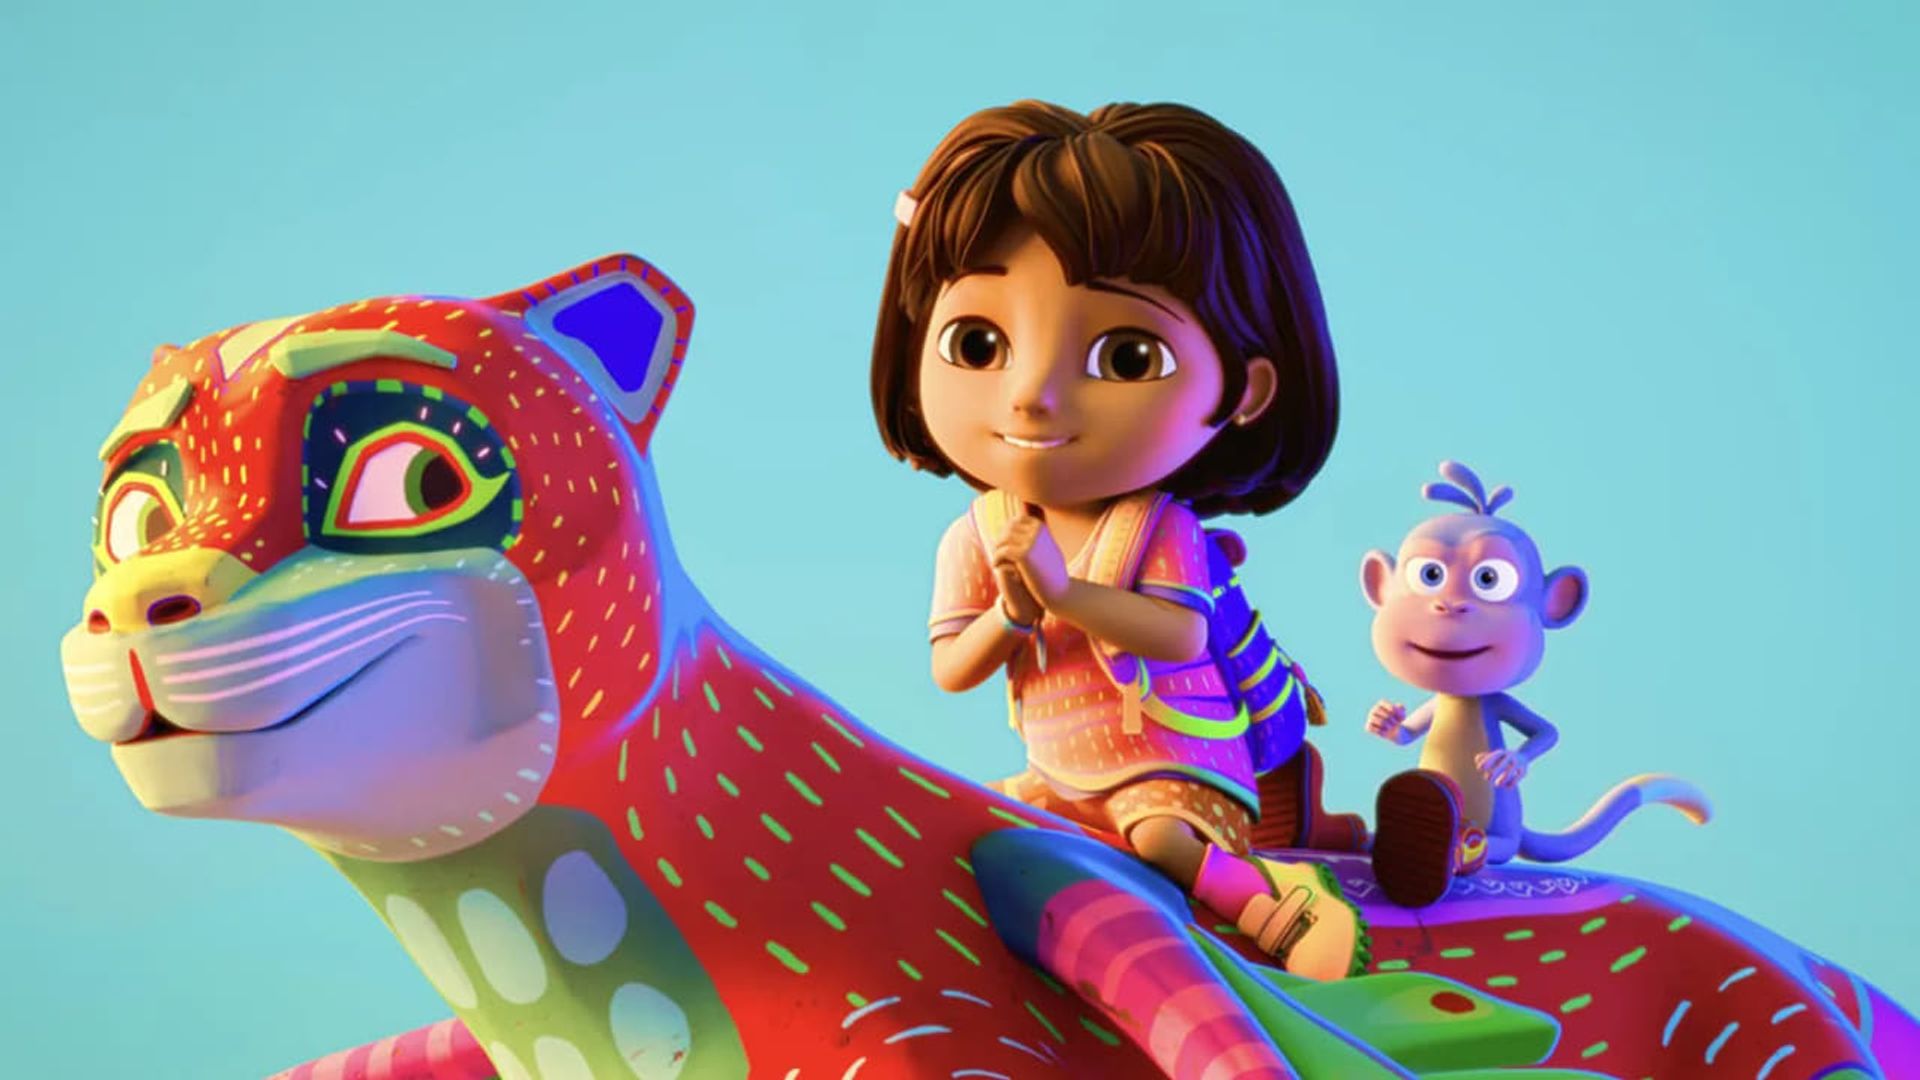 Dora and the Fantastical Creatures background